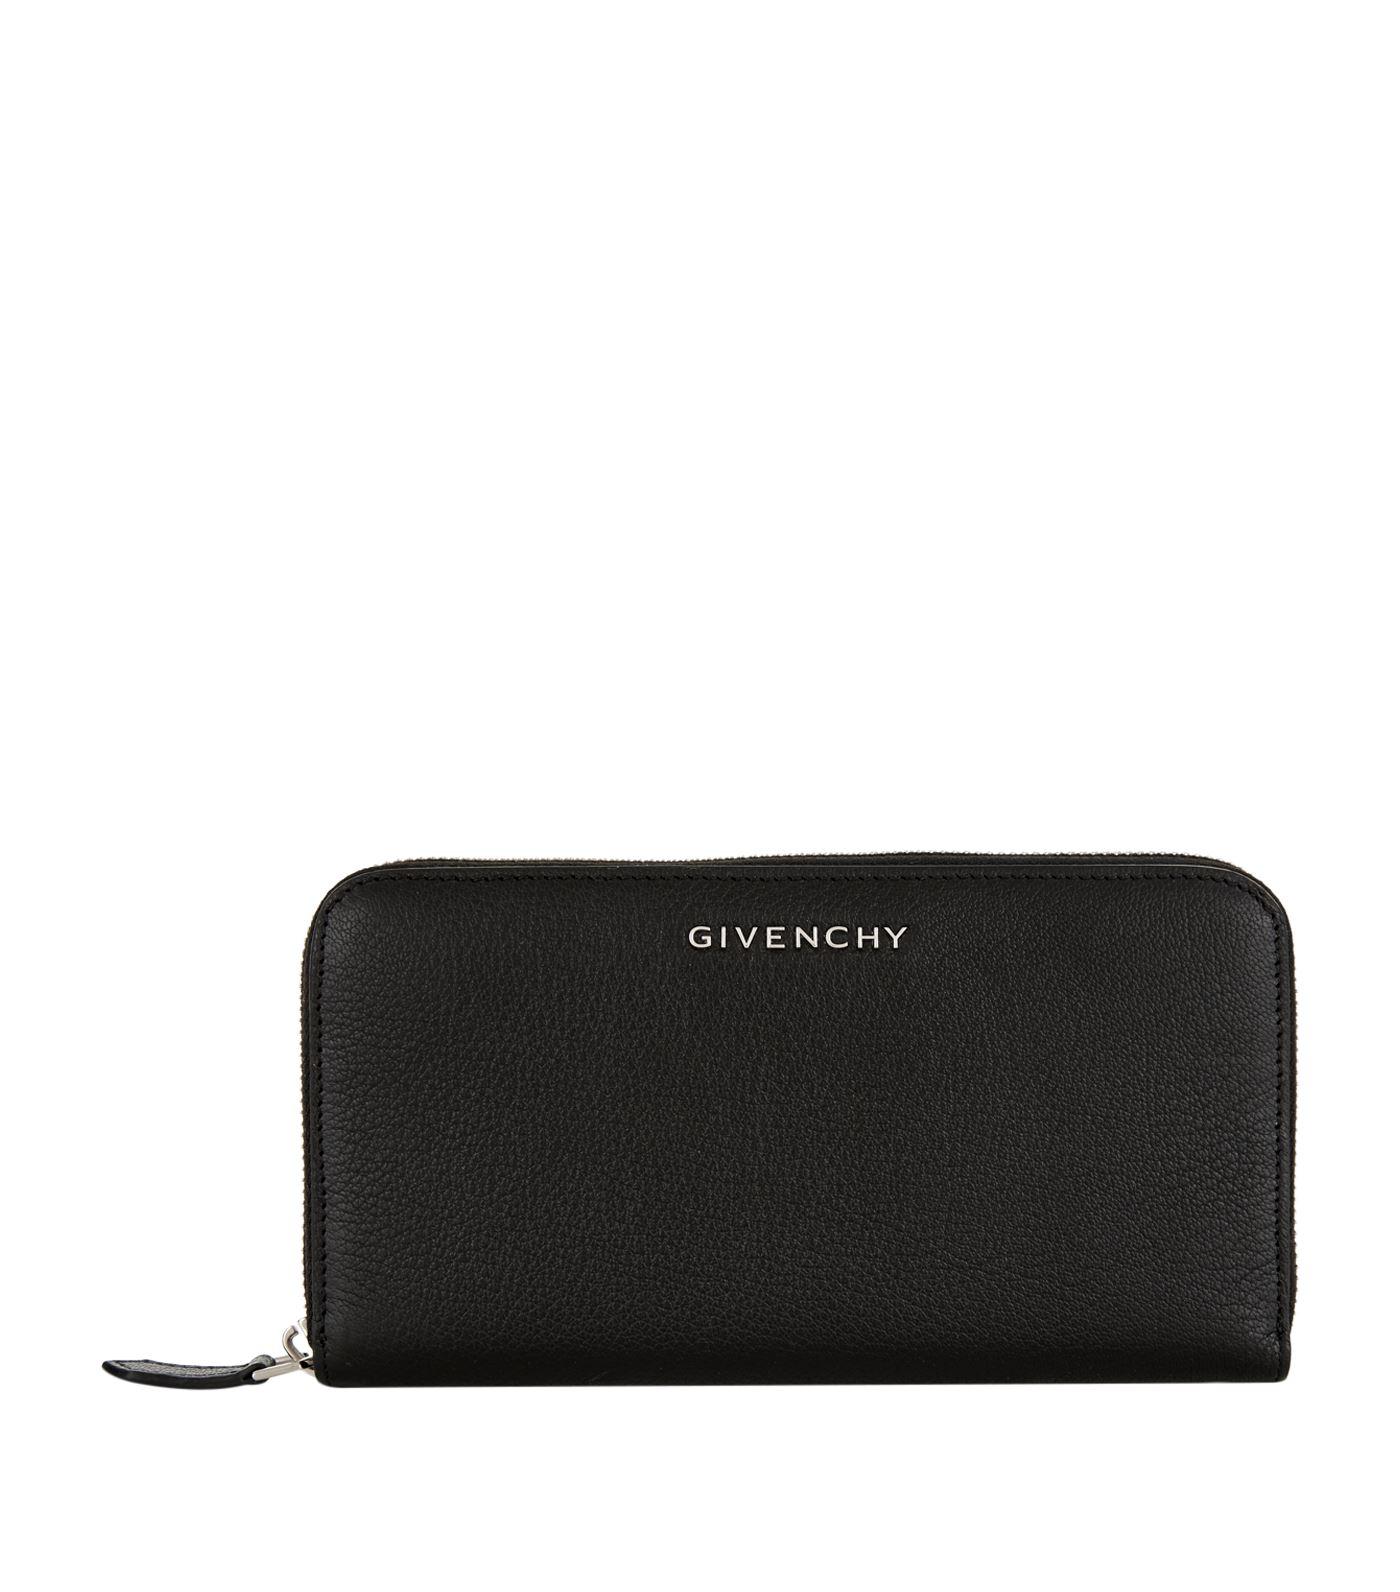 Givenchy Pandora Wallet in Black | Lyst